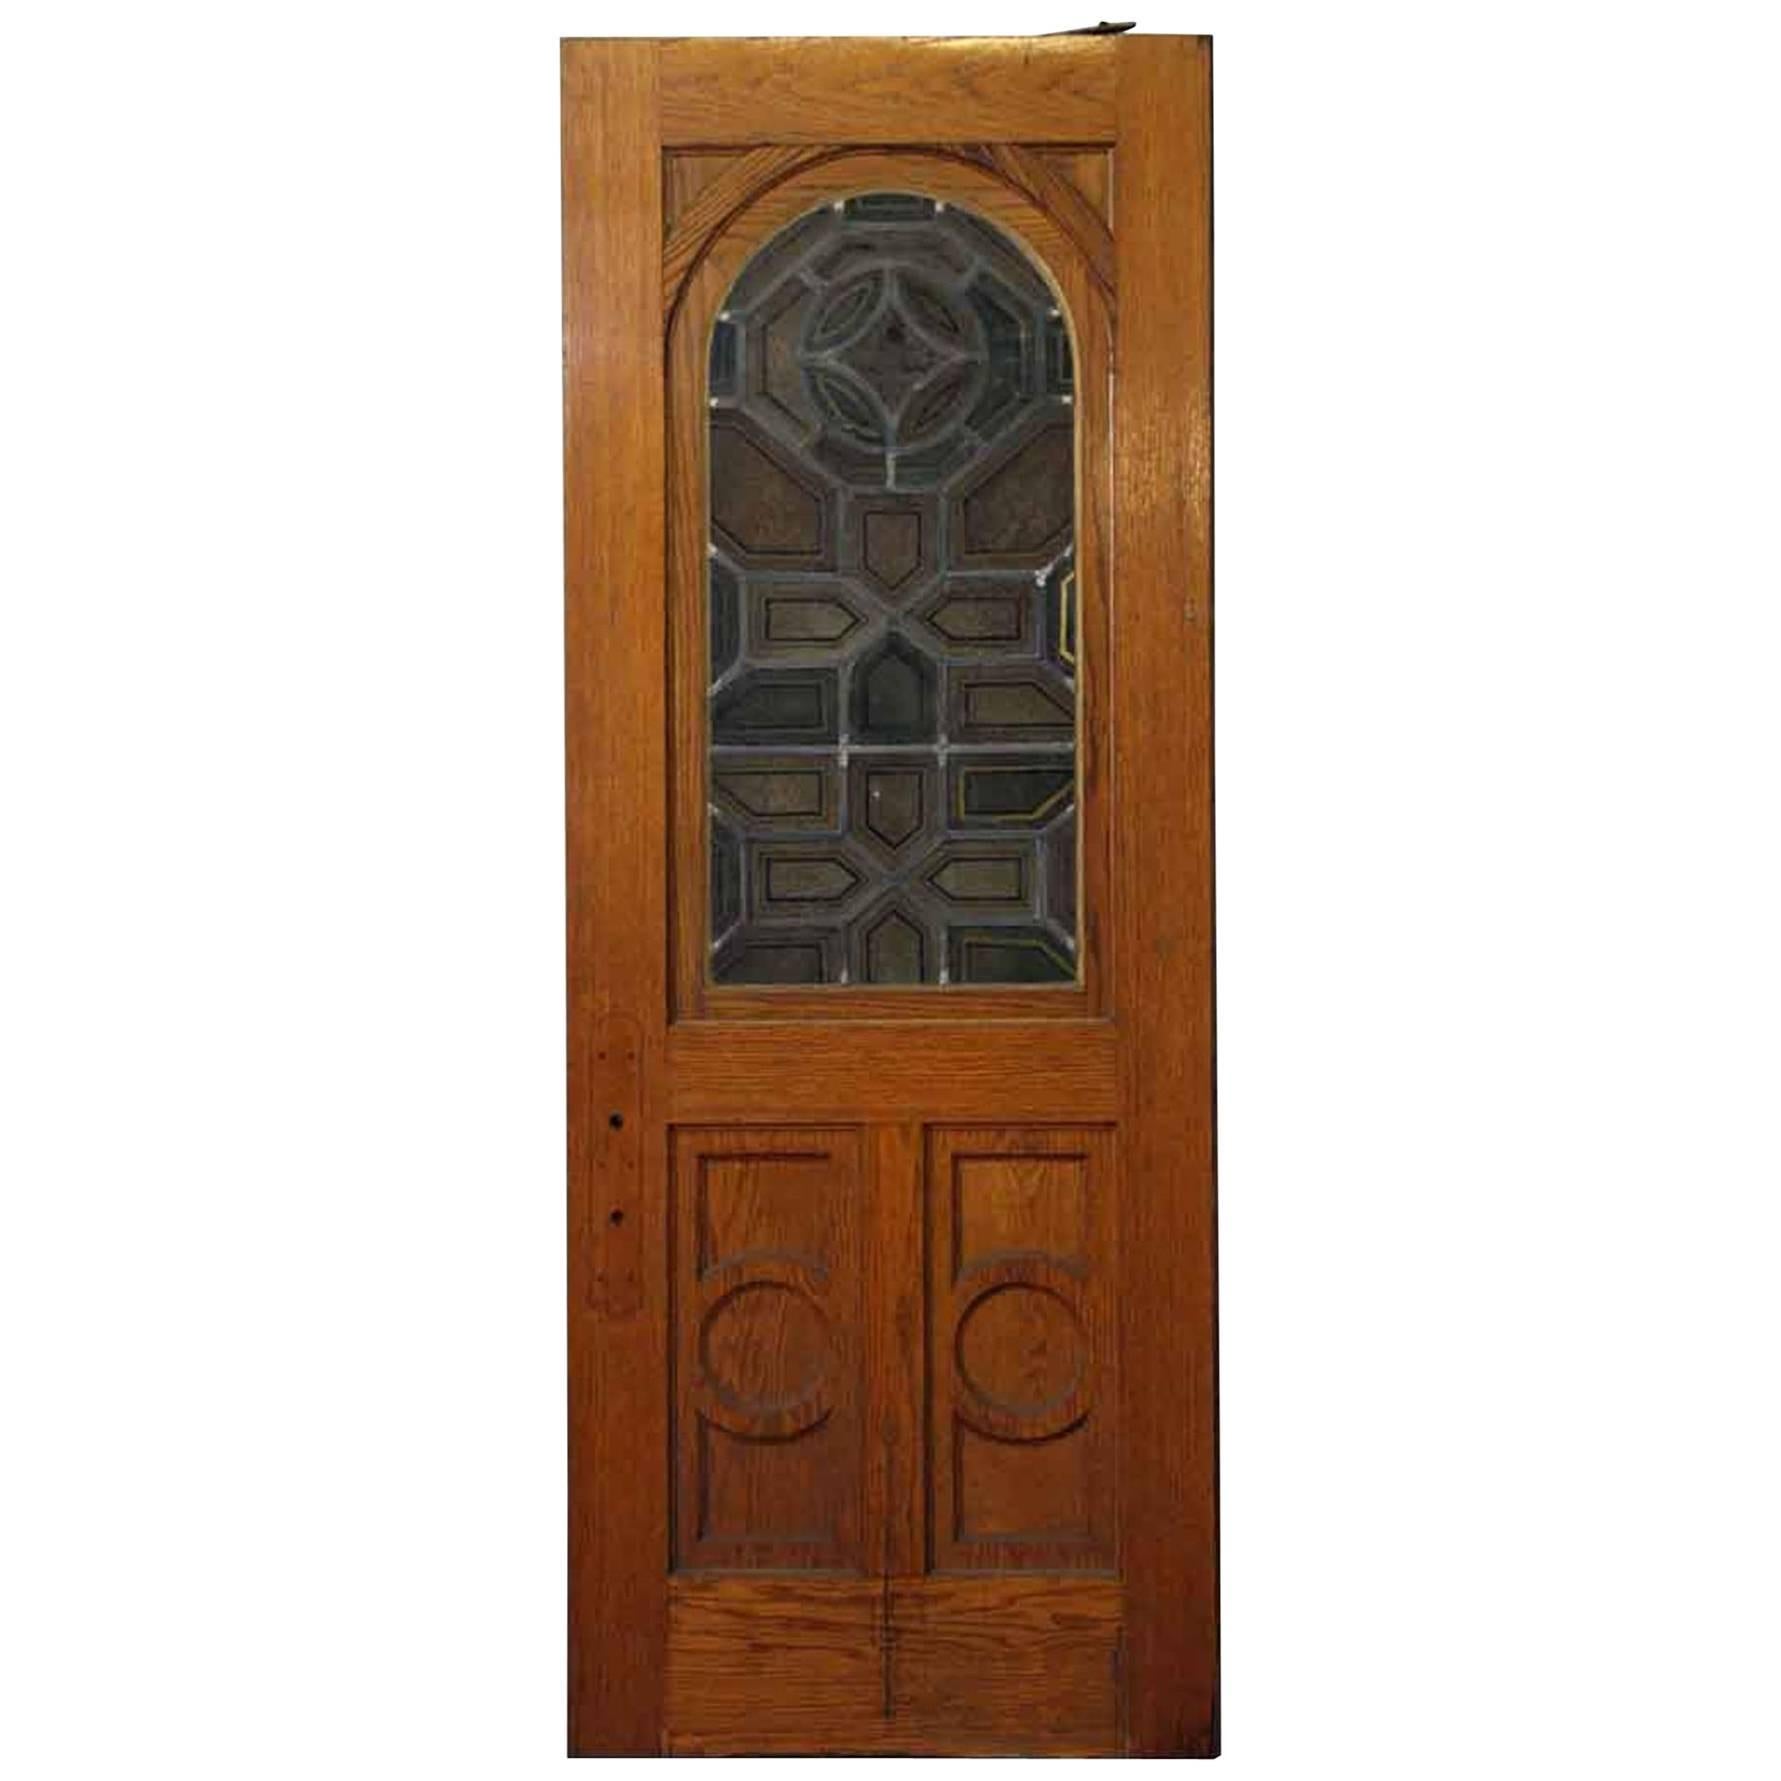 1870s Arched Stained Glass Swinging Wood Church Door